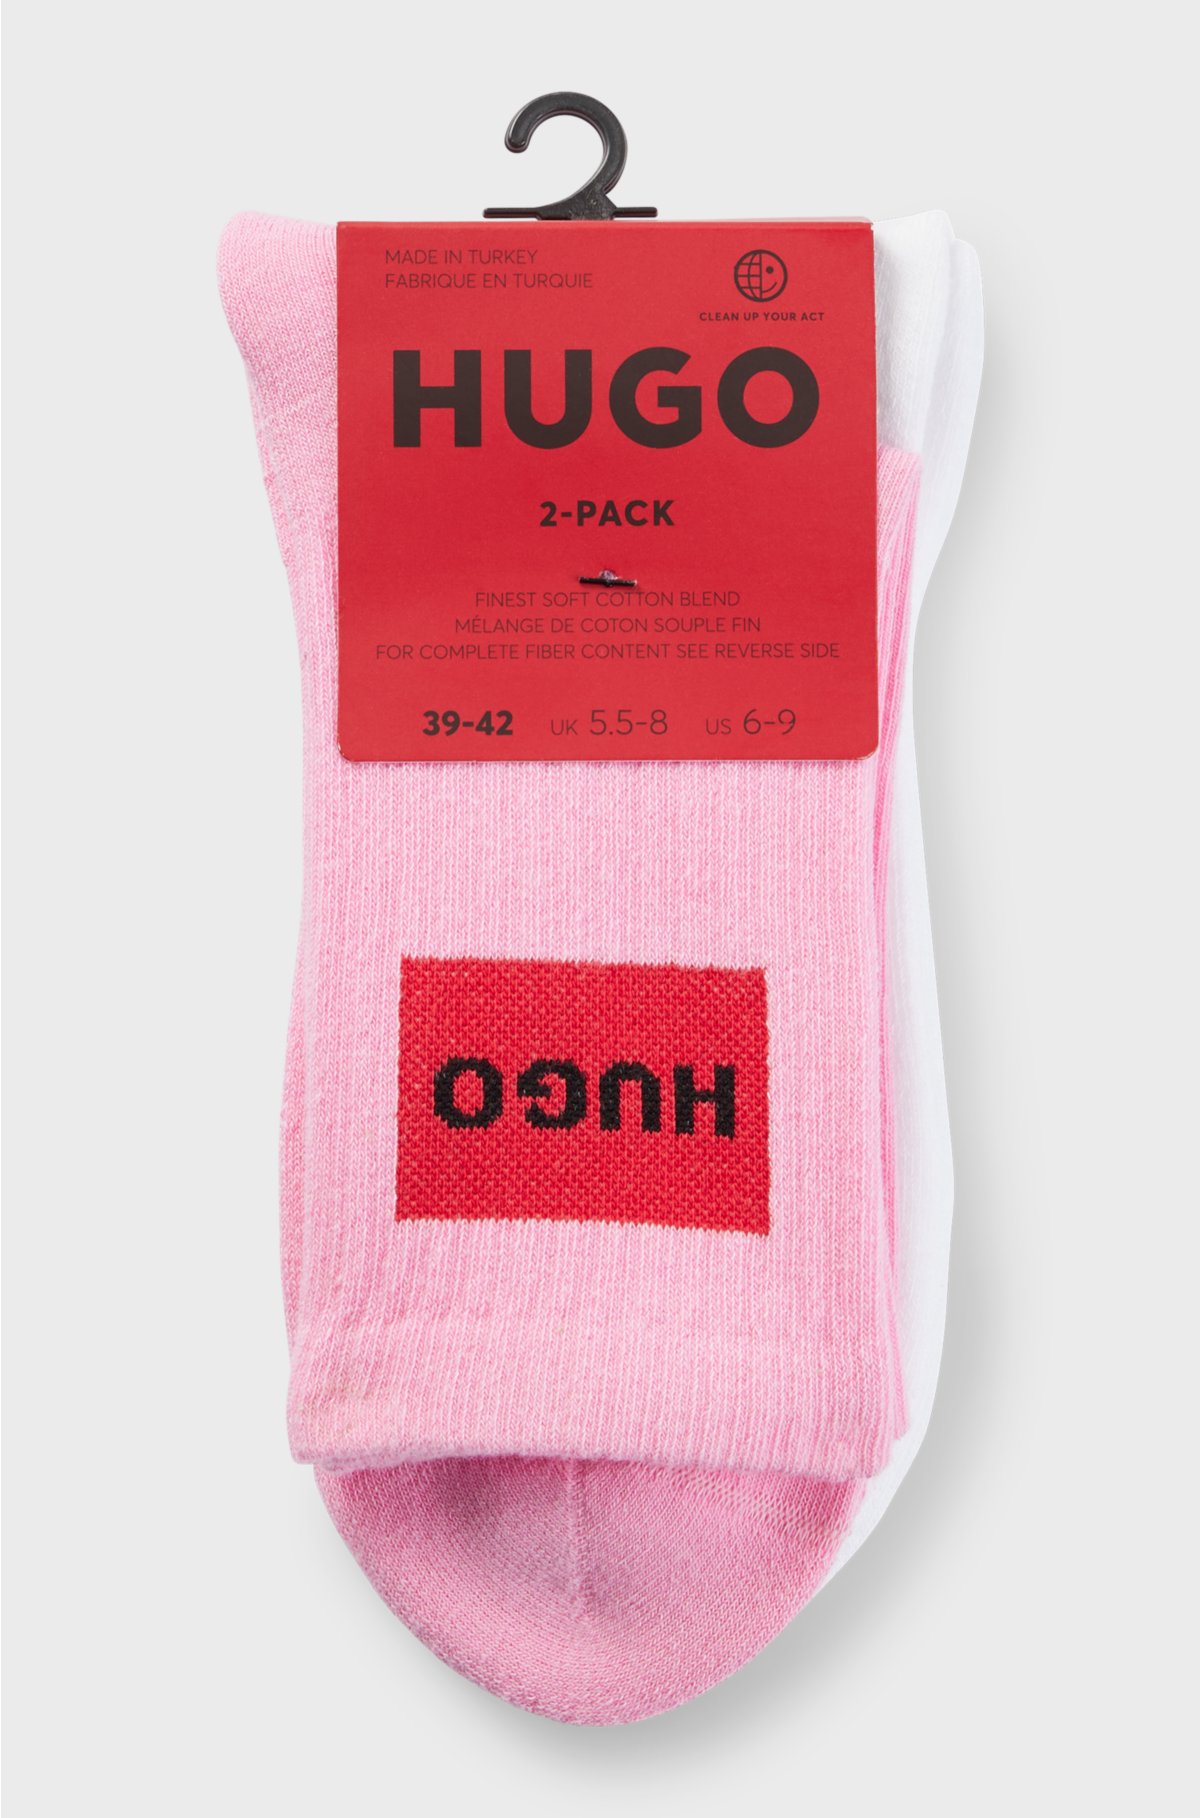 Two-pack of short-length socks with red logo labels, White / Pink